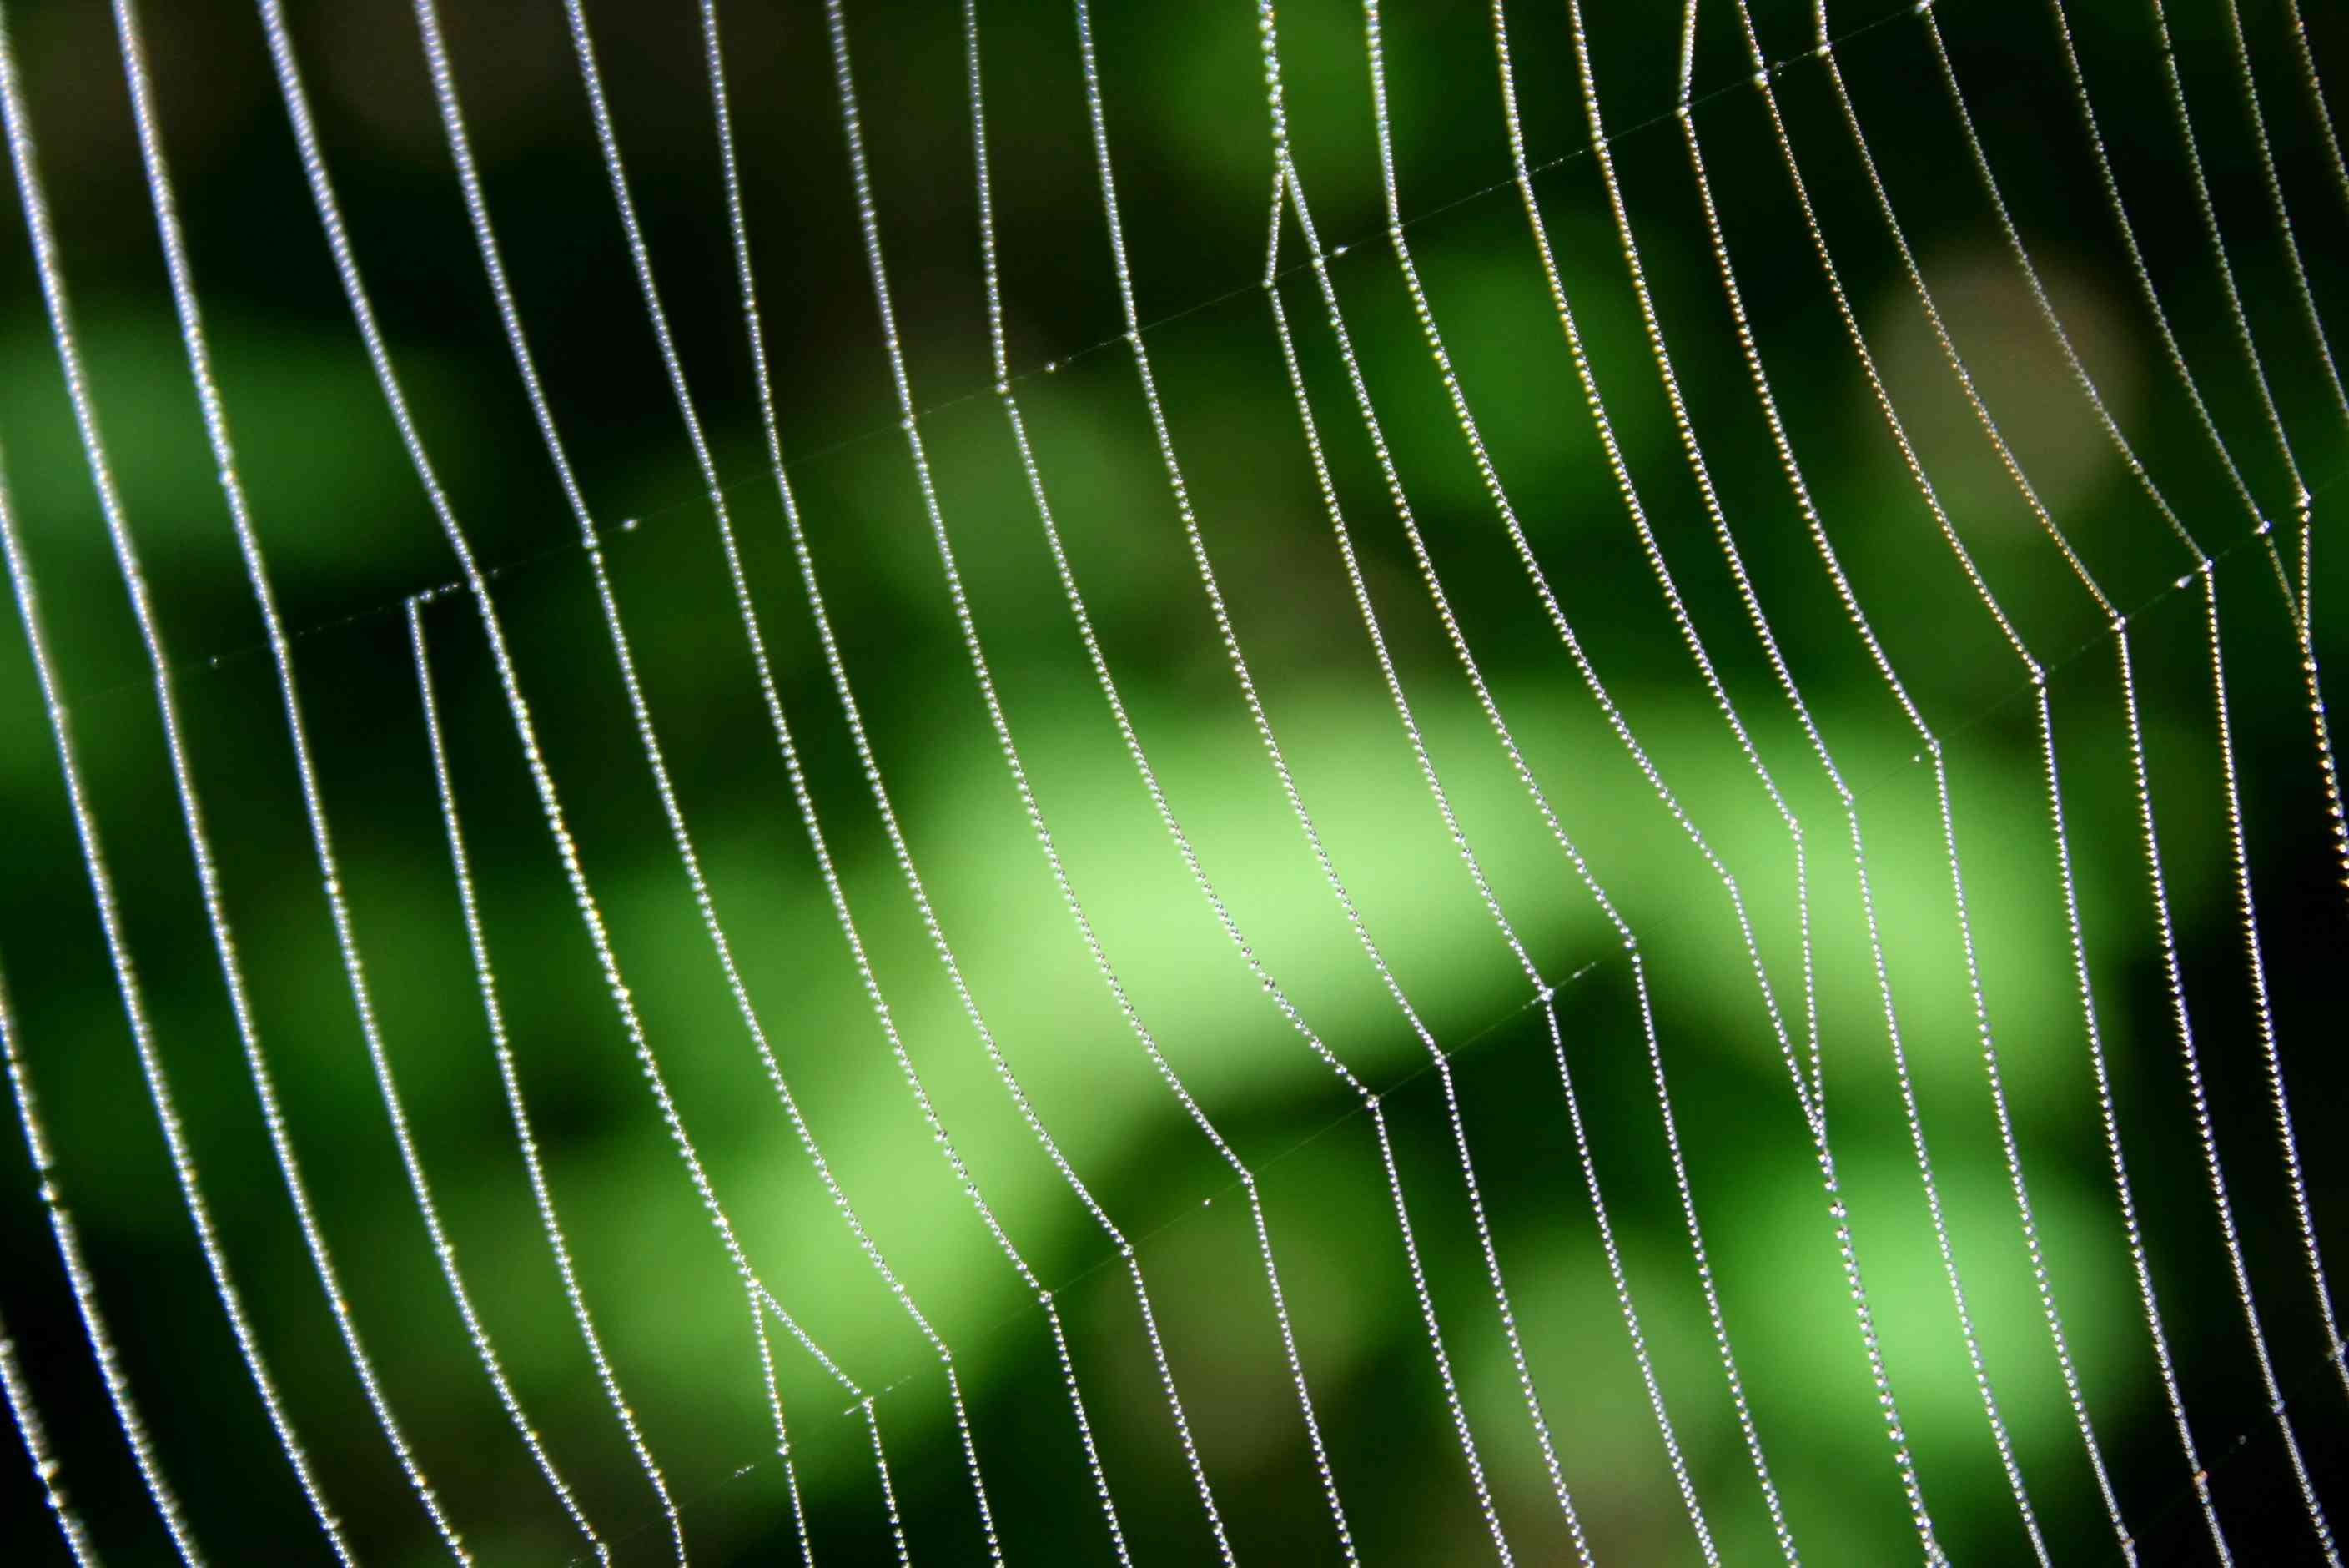 Spiders Web with Dew Drops Sunny Woods tb0909tdx.jpg